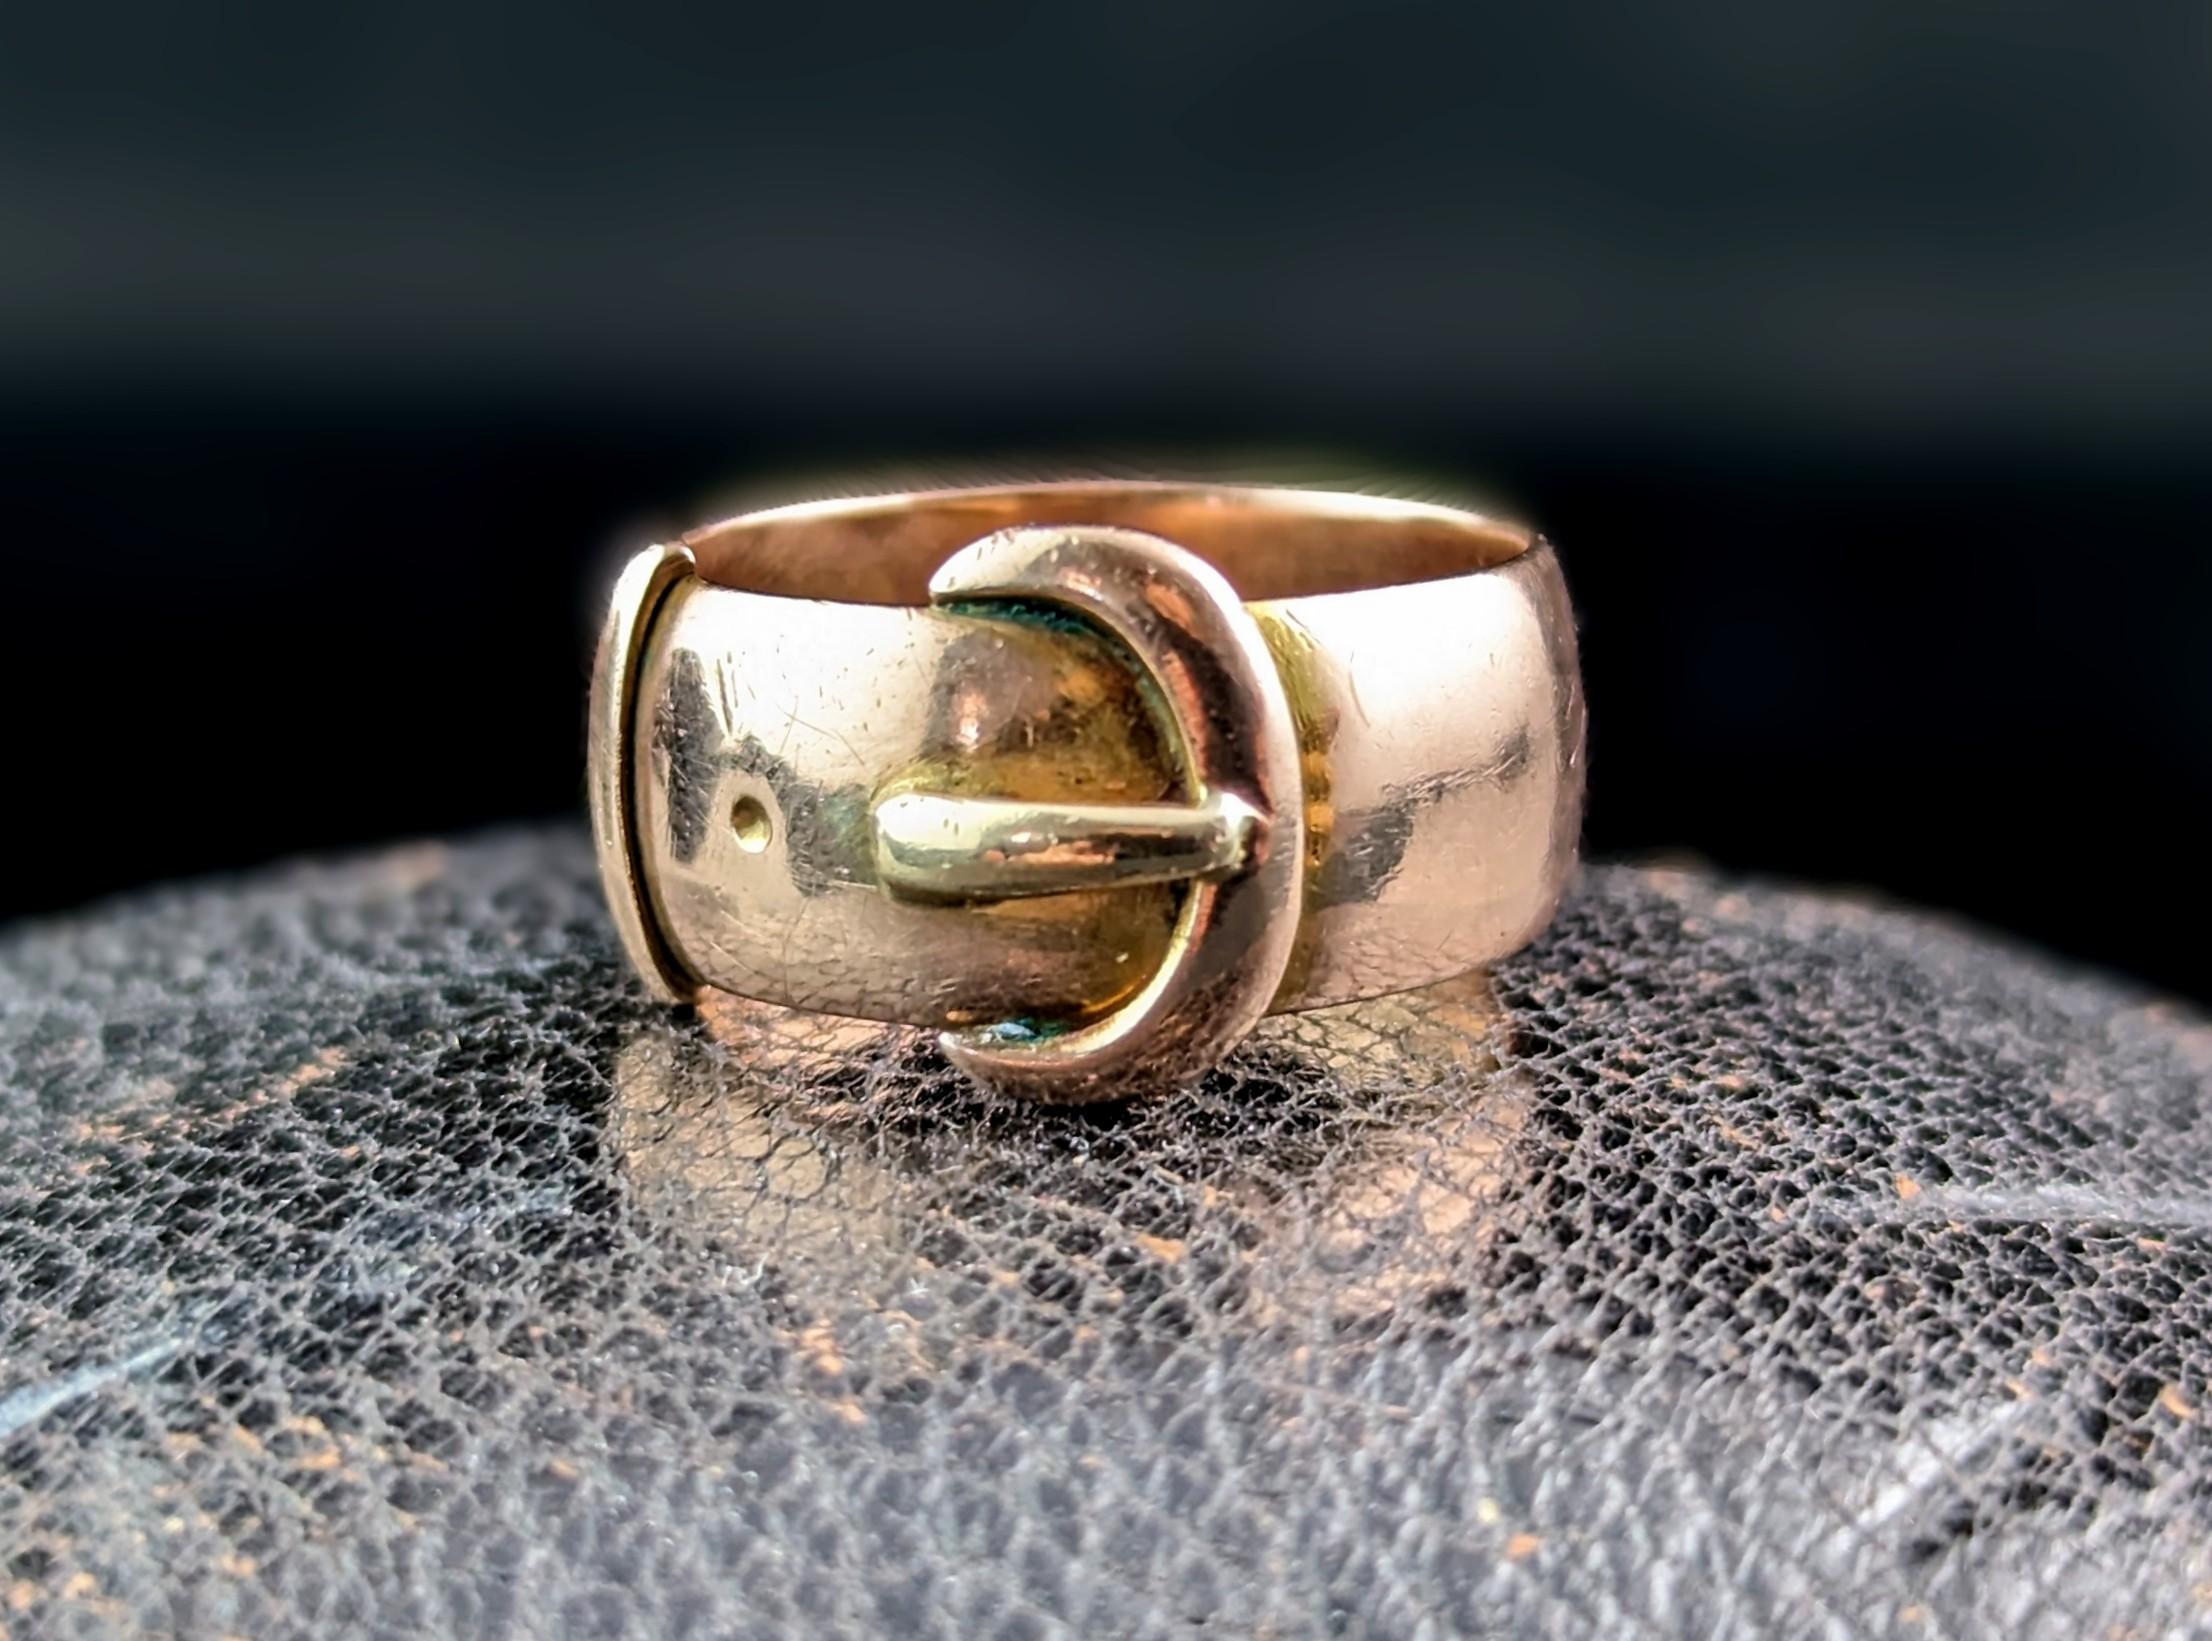 You cannot go wrong with a good antique gold buckle ring and the chunkier the better in our opinion.

It is a wide cigar band style but with a light D profile and a buckle design to the face, the buckle traditionally symbolises holding someone close